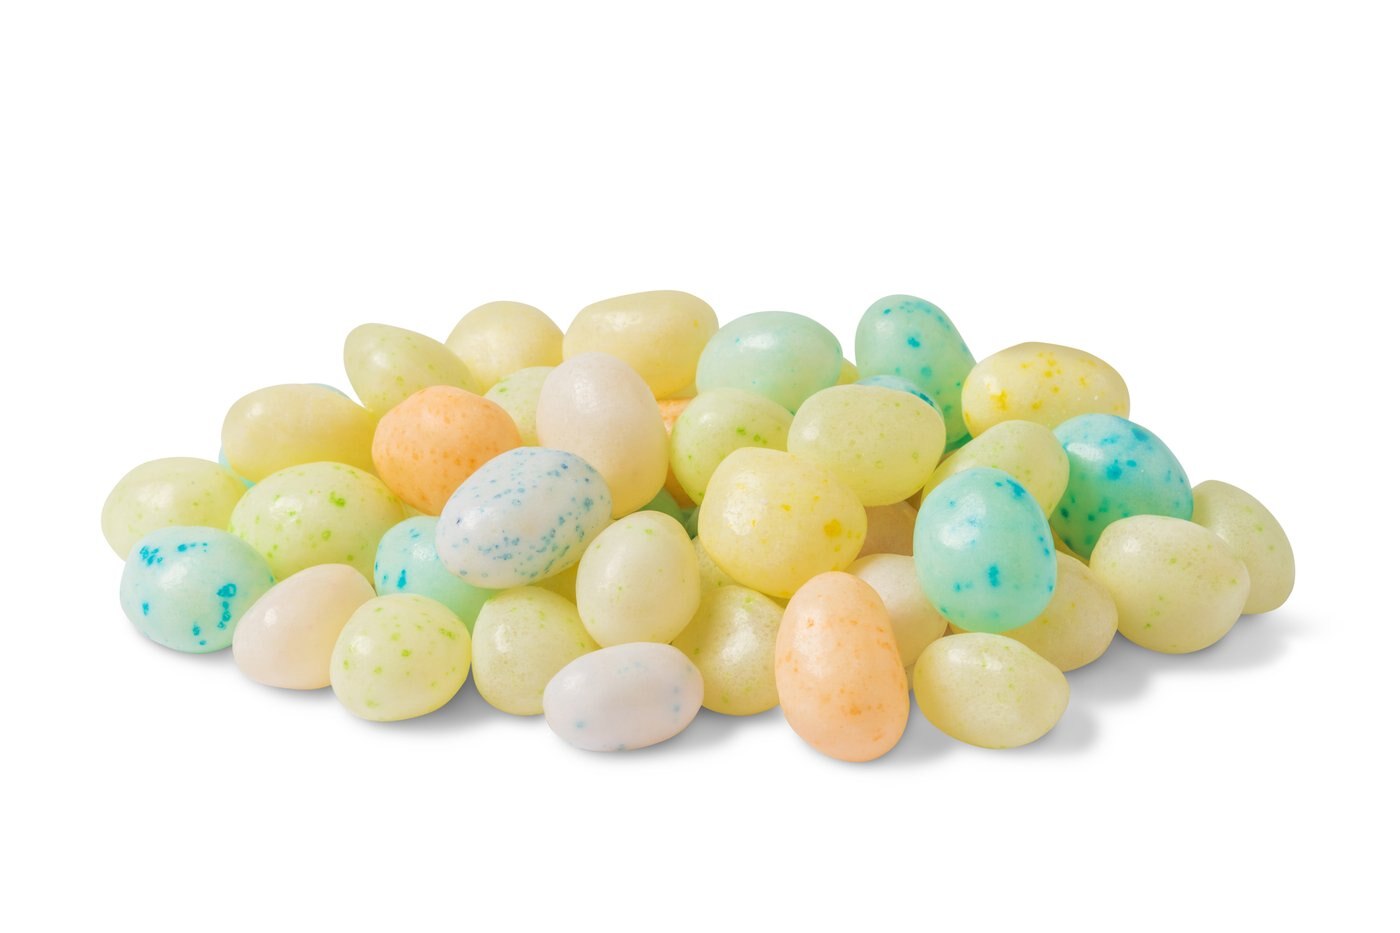 Speckled Jelly Beans image zoom